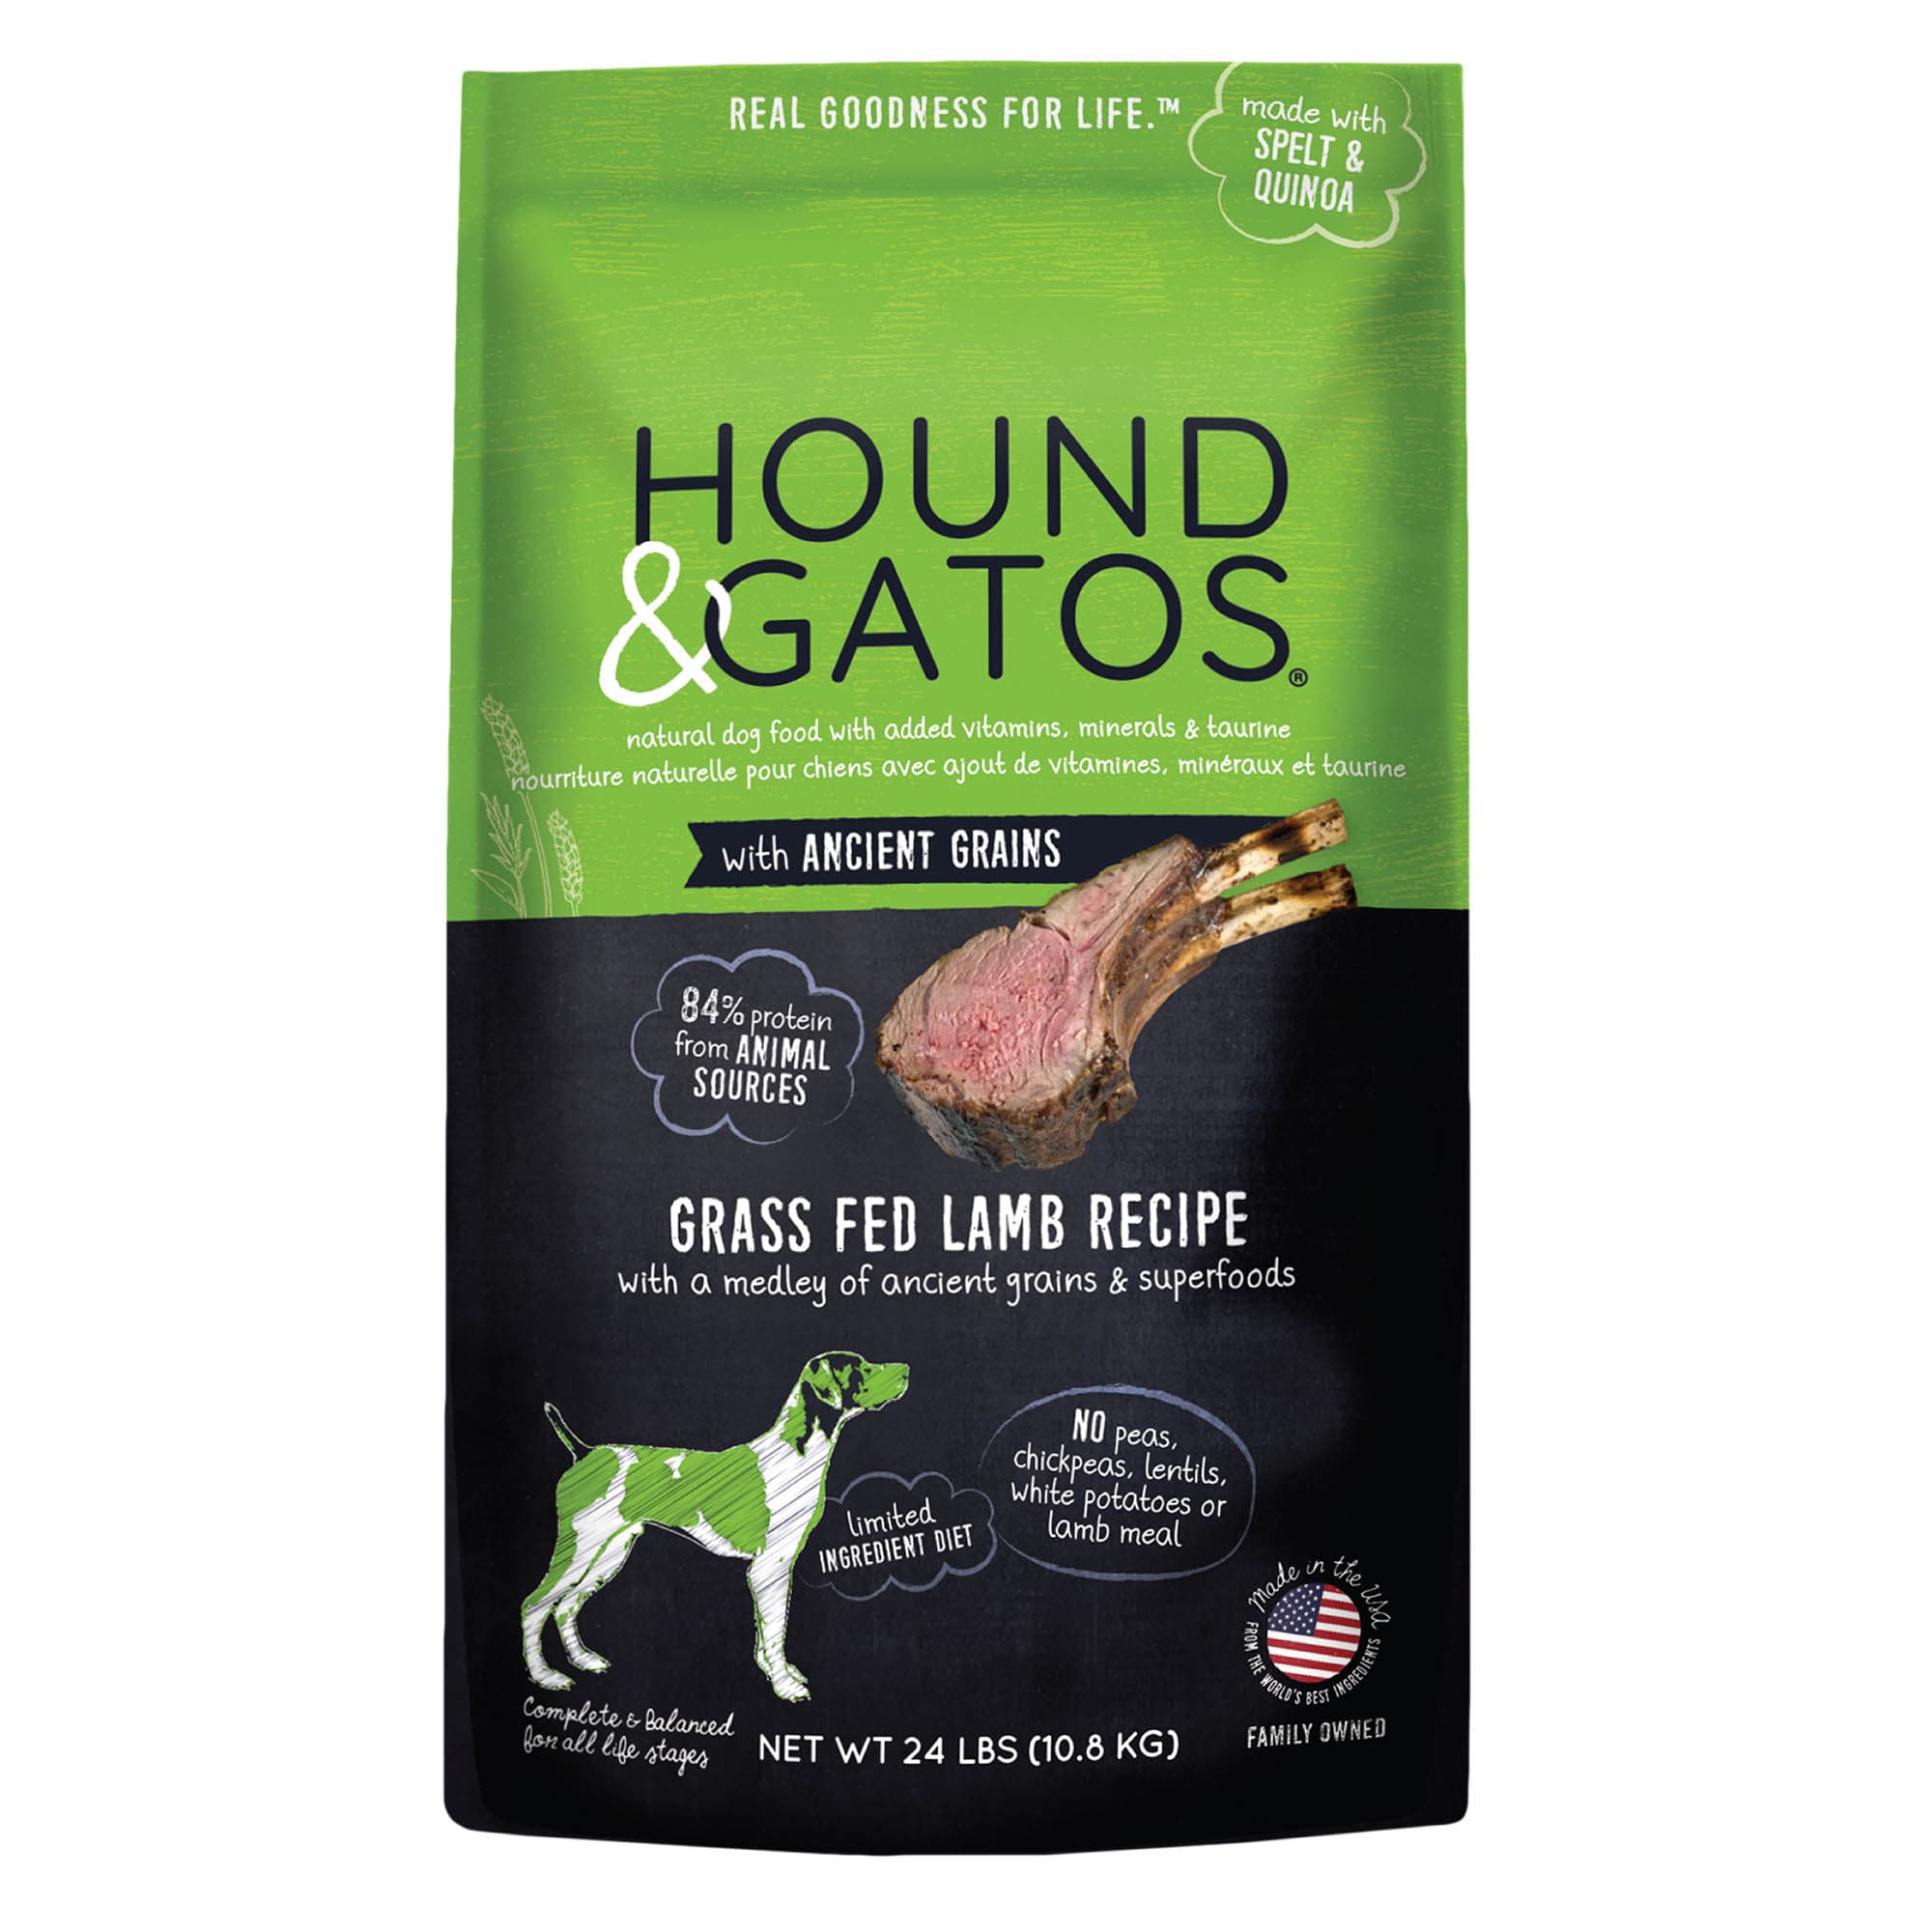 Hound & Gatos with Ancient Grains Limited Ingredient Diet Grass Fed Lamb Recipe Dry Dog Food, 24 lbs.